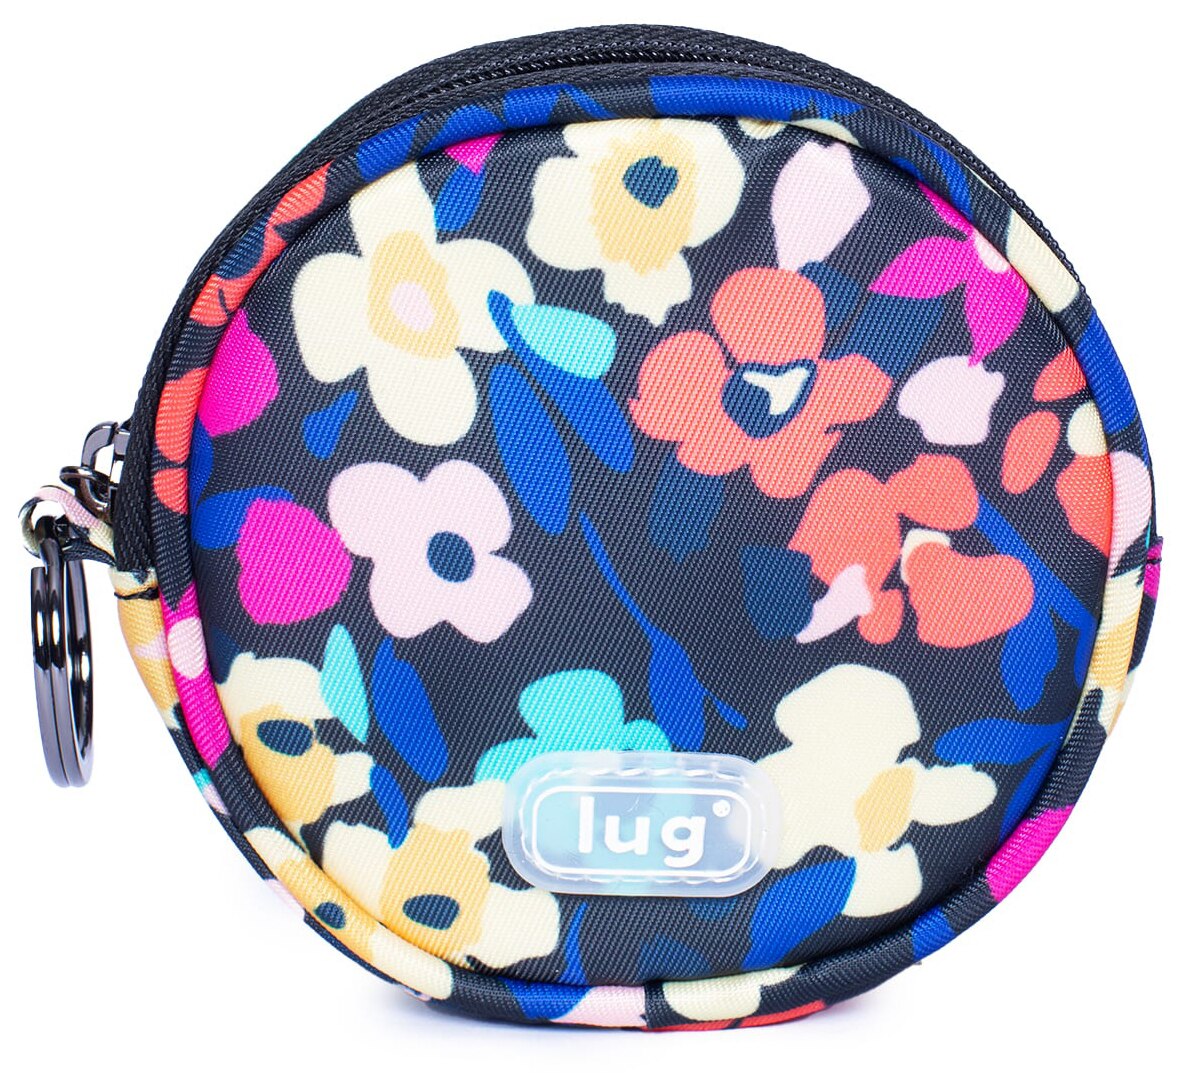 Coin purse - Just Bags Luggage Center